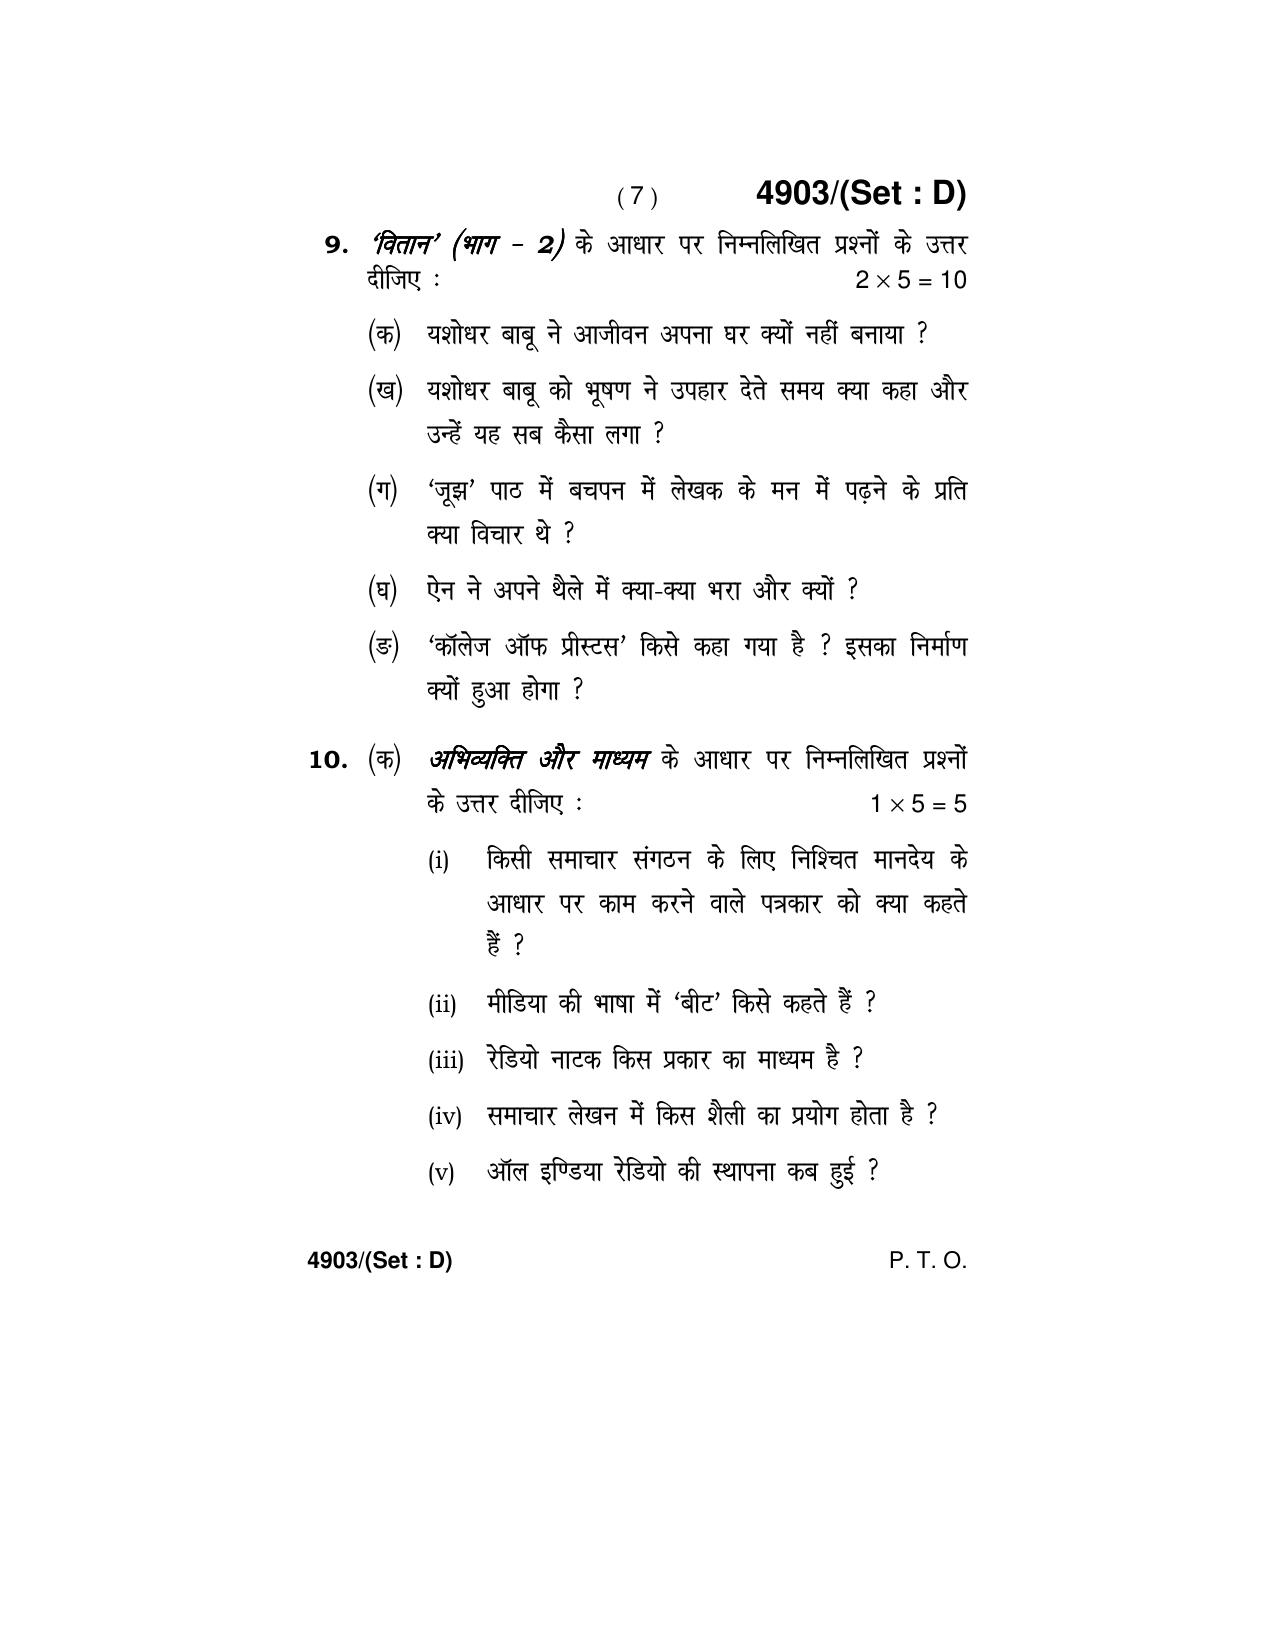 Haryana Board HBSE Class 12 Hindi Core 2020 Question Paper - Page 31